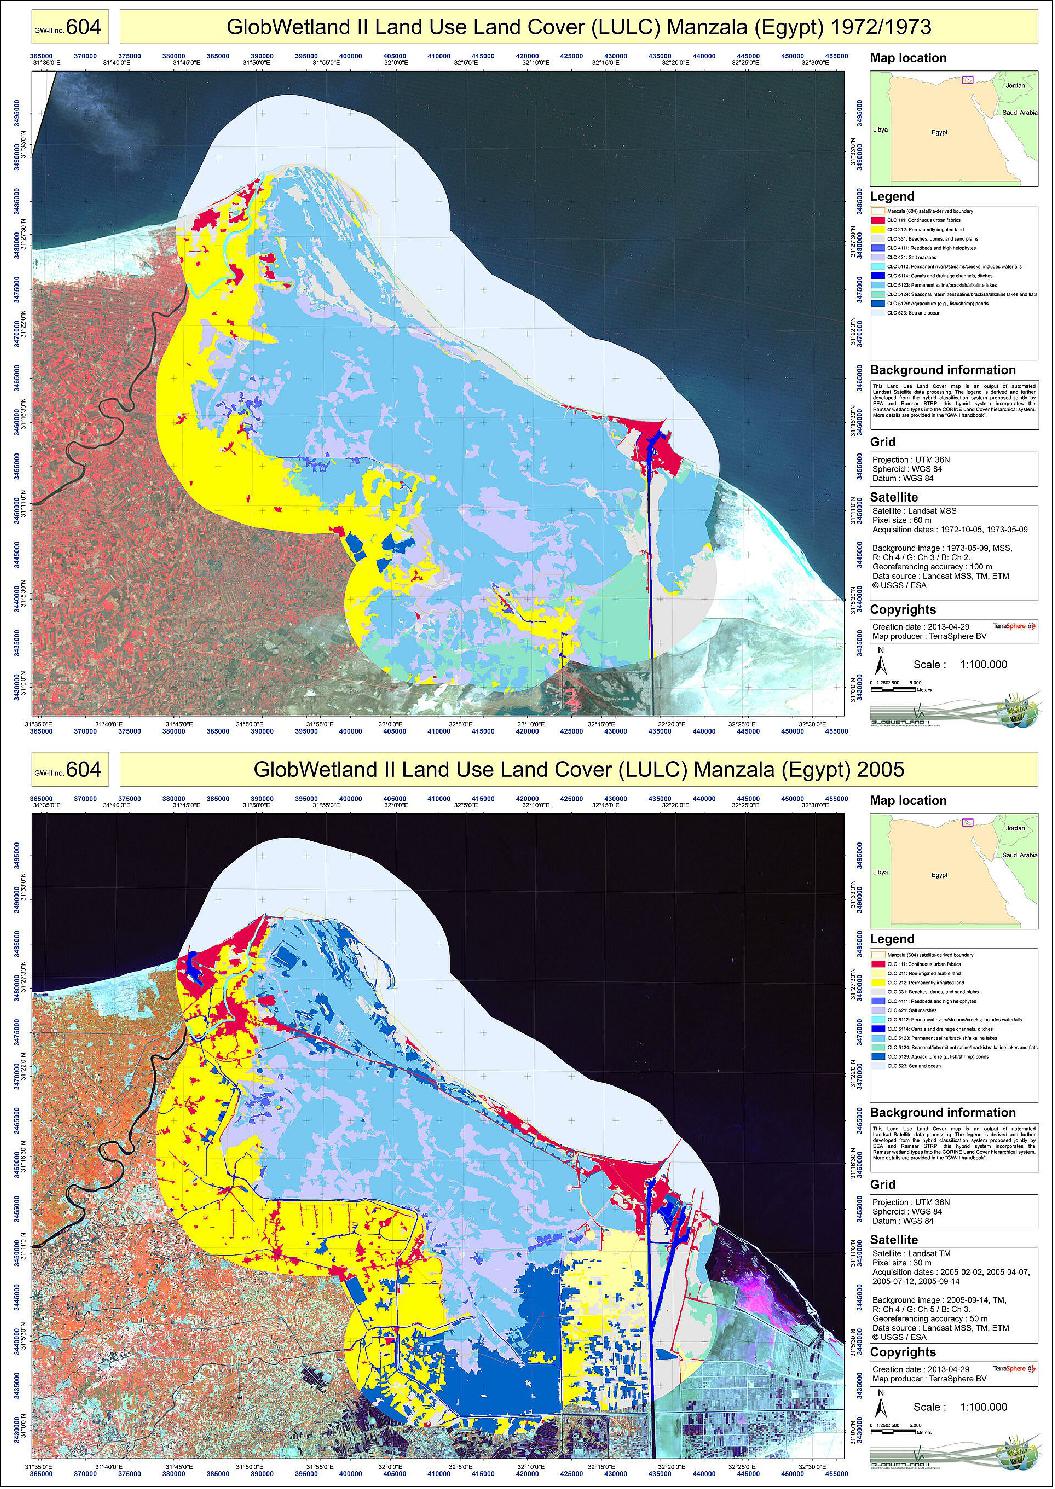 Figure 13: Monitoring Lake Manzala. The brackish Lake Manzala is located in northeast Egypt on the Nile Delta, near Port Said. The government drained substantial portions of the lake in an effort to convert its rich Nile deposits into farmland. This transformation caused the loss of over 195 sq km of brackish and permanent alkaline lakes between 1975 and 2005. The increases of aquaculture (dark blue) and crops (yellow) are evident in the maps (image credit: ESA / GlobWetland II project team / MWO)